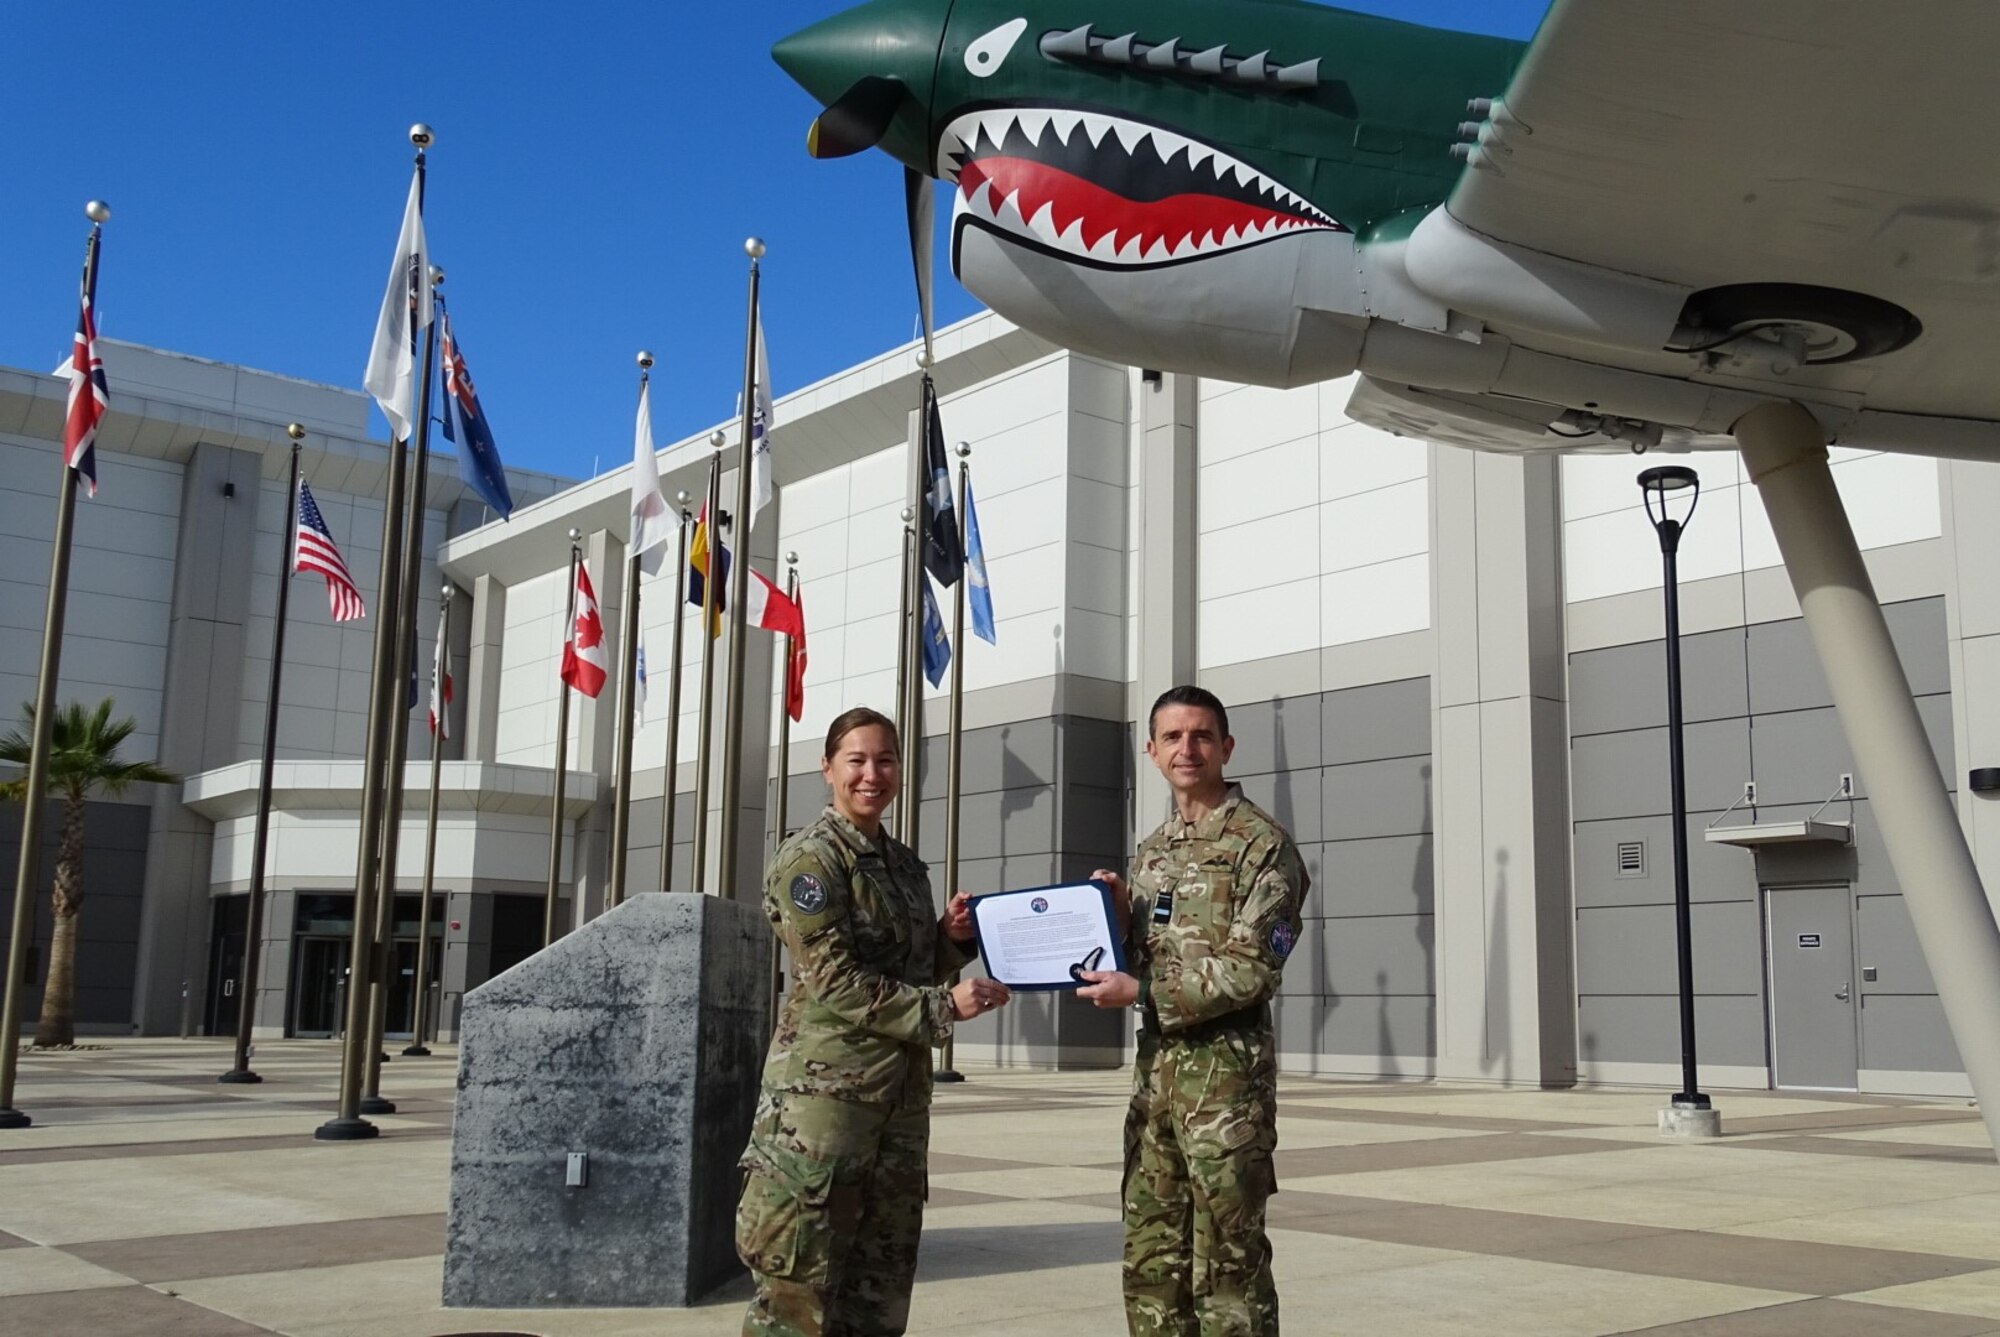 Royal Air Force Air Vice-Marshal Paul Godfrey (right), UK Space Command commander, presents U.S. Space Force Lt. Col. Michaela Schannep (left), Director of Operations for the 55th Combat Training Squadron, with a UK Space Operations Badge in recognition of Schannep’s status as a UK-qualified space instructor.
(U.S. Space Force photo by Capt. Jefferson Mitchell)